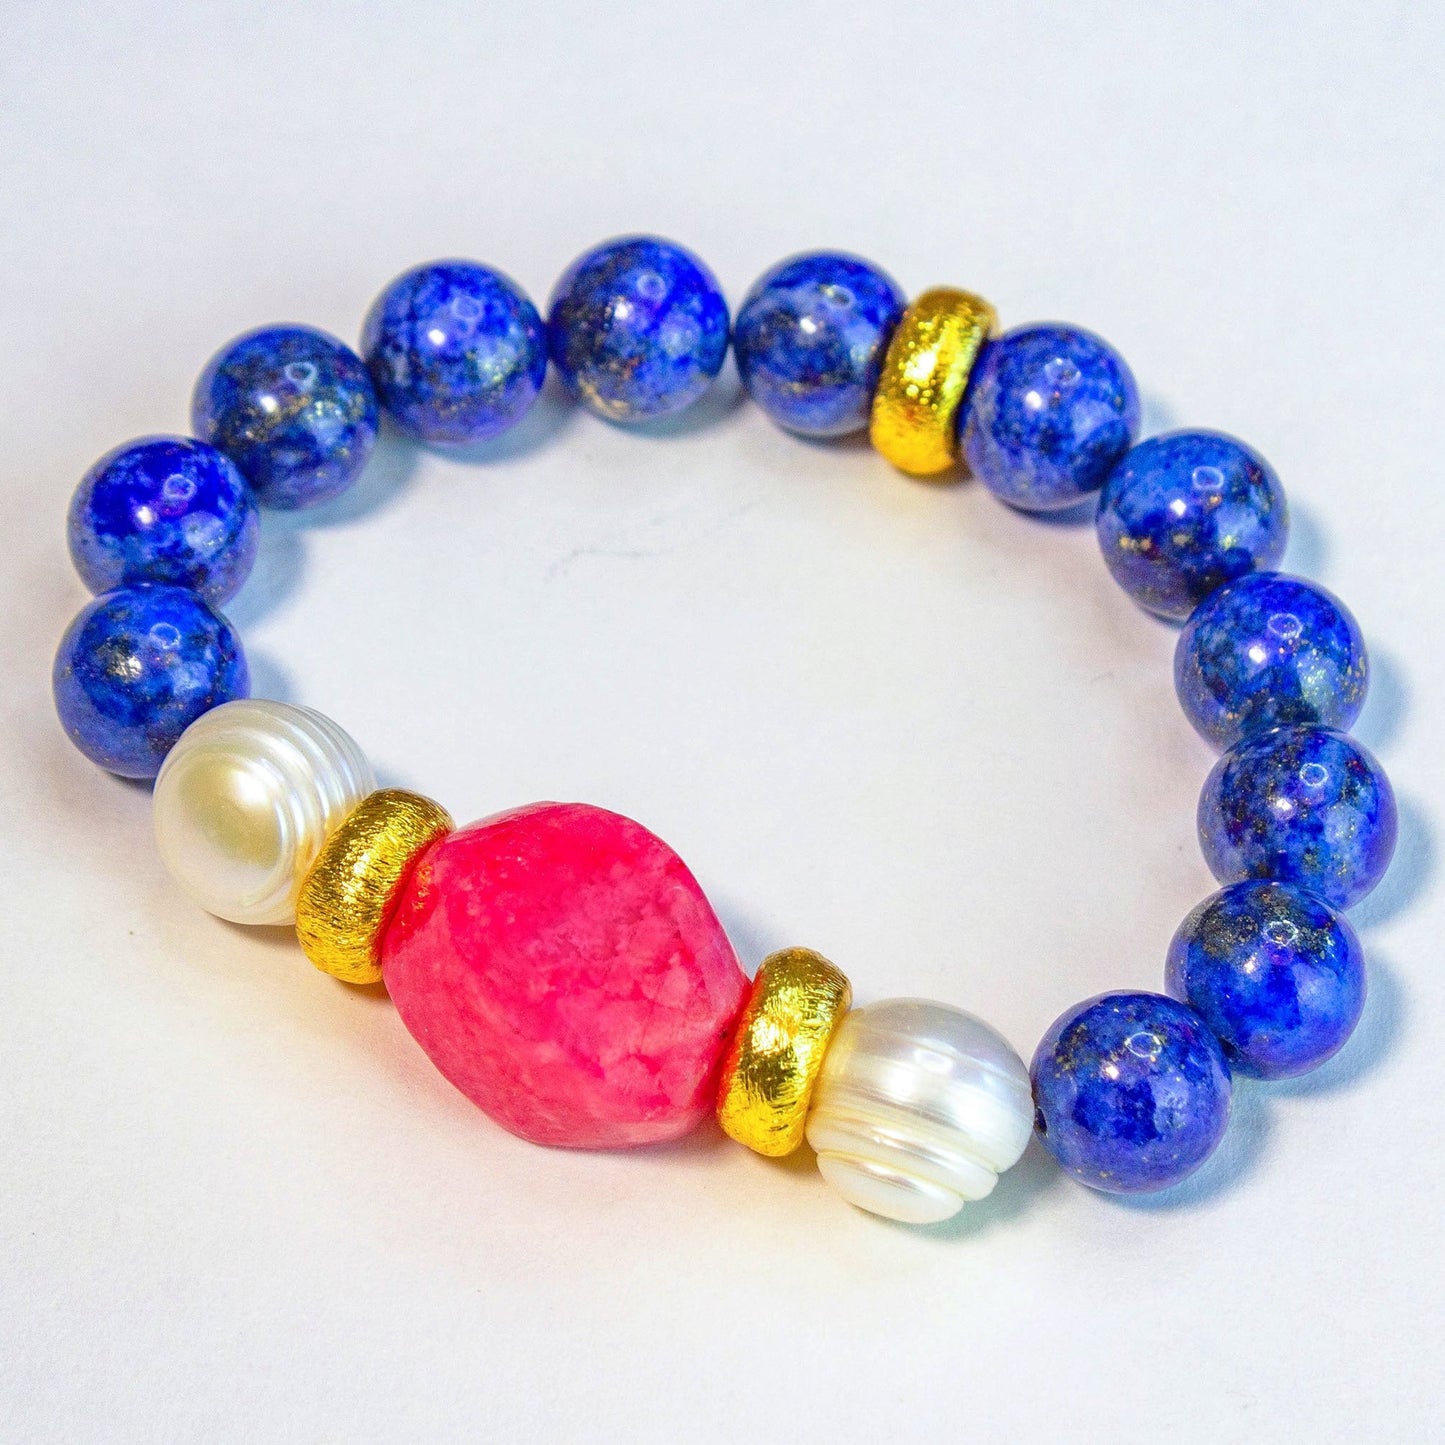 Lapis Lazuli Gemstones with Baroque Pearls and  Natural Pink Sapphire Bracelet